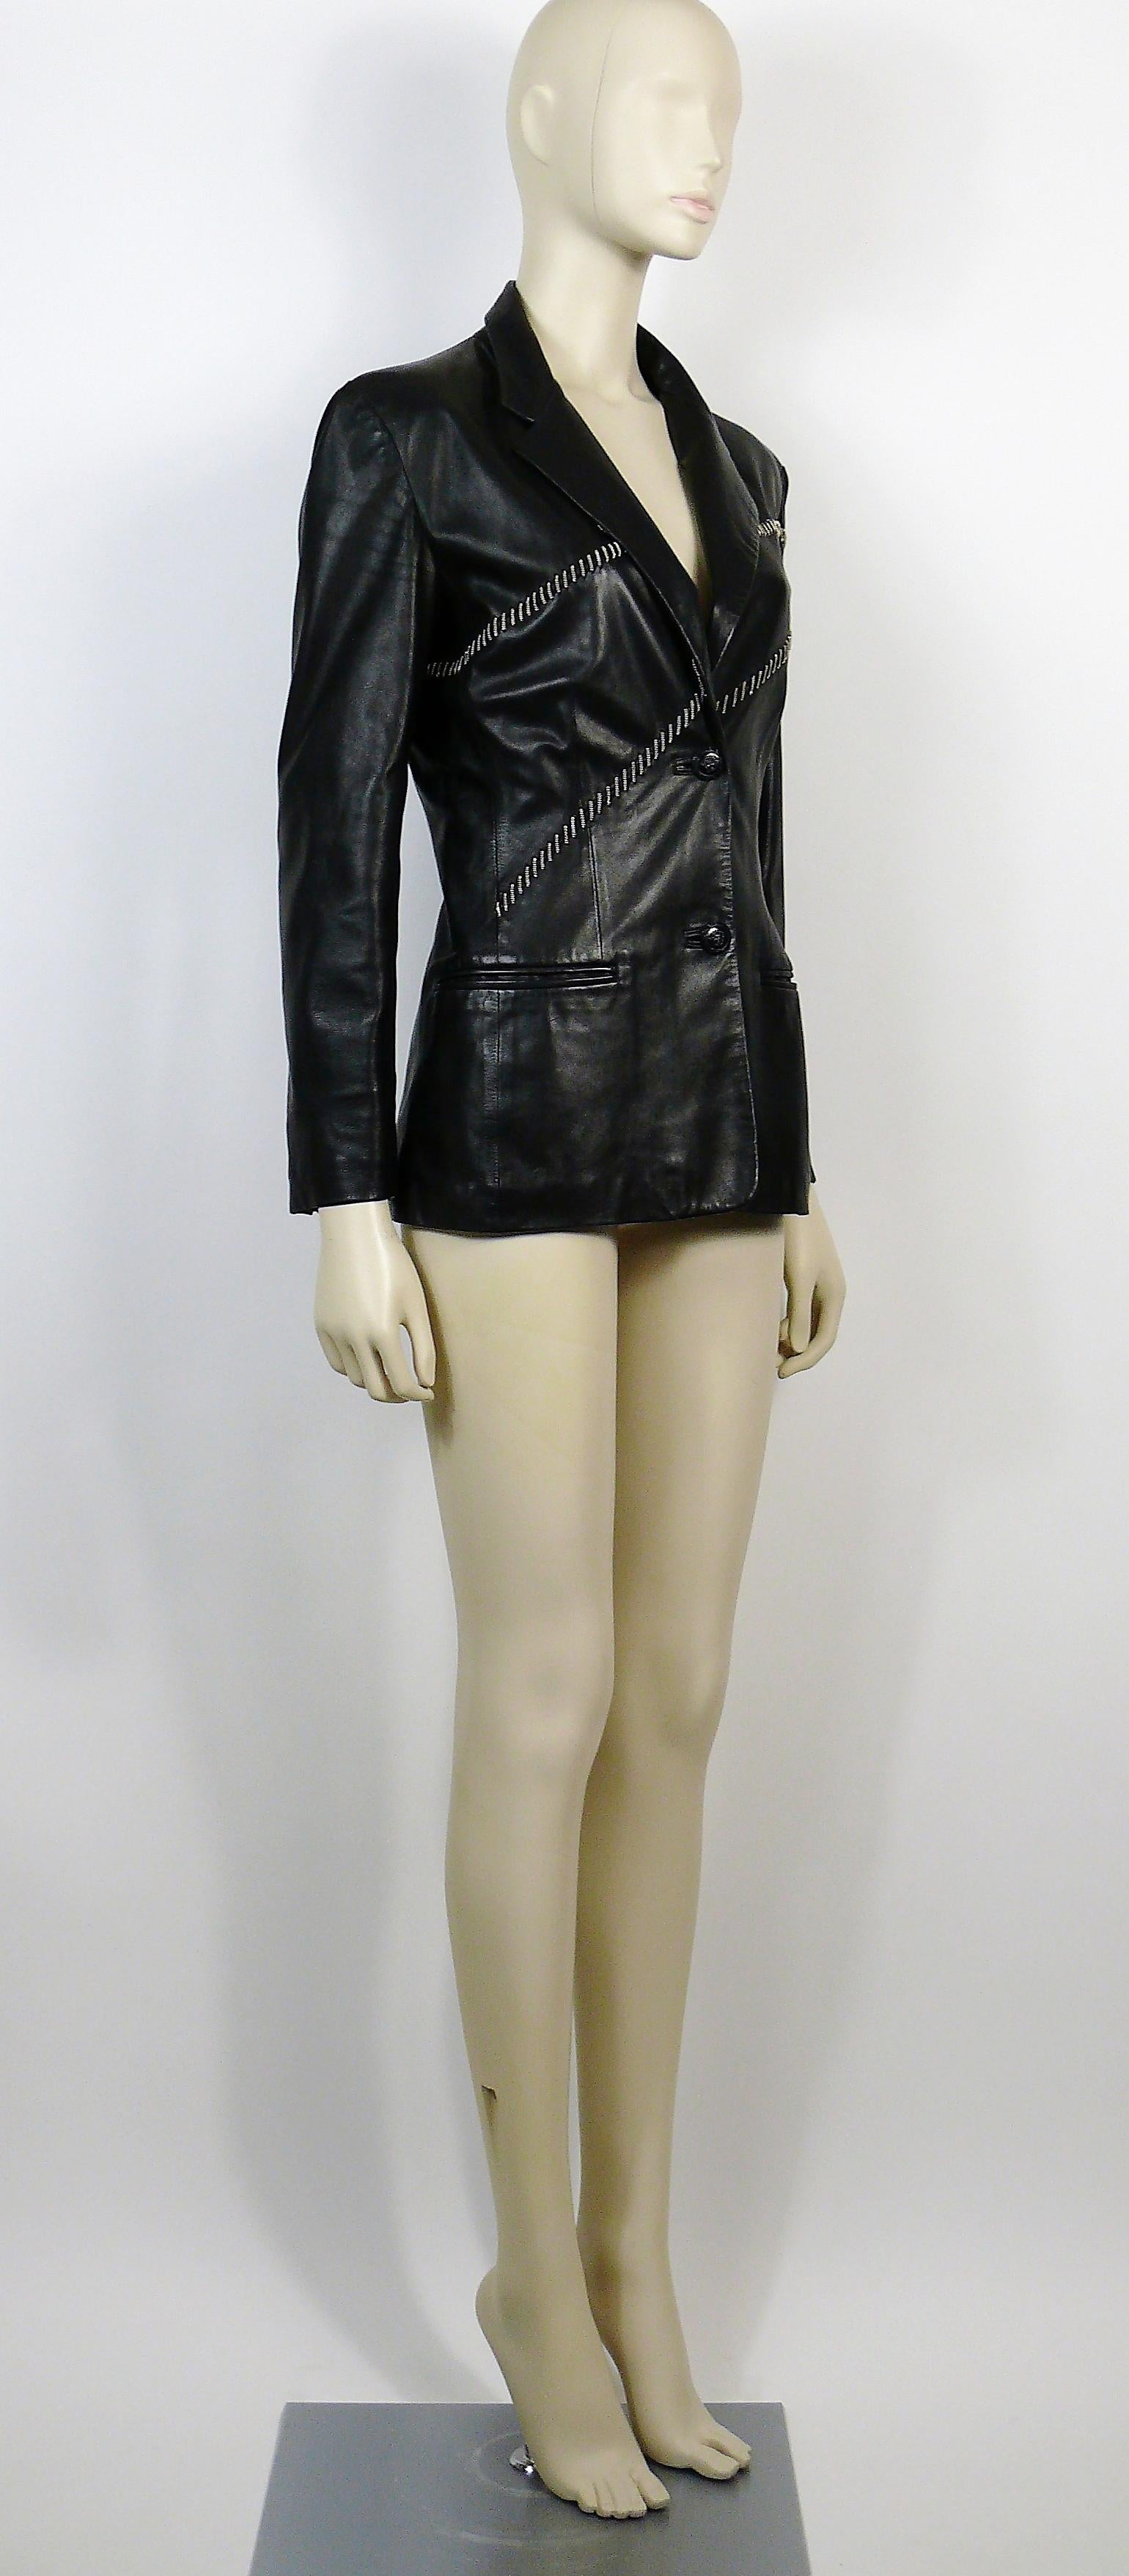 GIANNI VERSACE vintage soft supple black leather blazer embellished with silver toned chains.

Front buttoning.
Black resin signature Medusa head buttons on front and cuffs.

Fully lined.

Label reads GIANNI VERSACE.
Made in Italy.

Size tag reads :